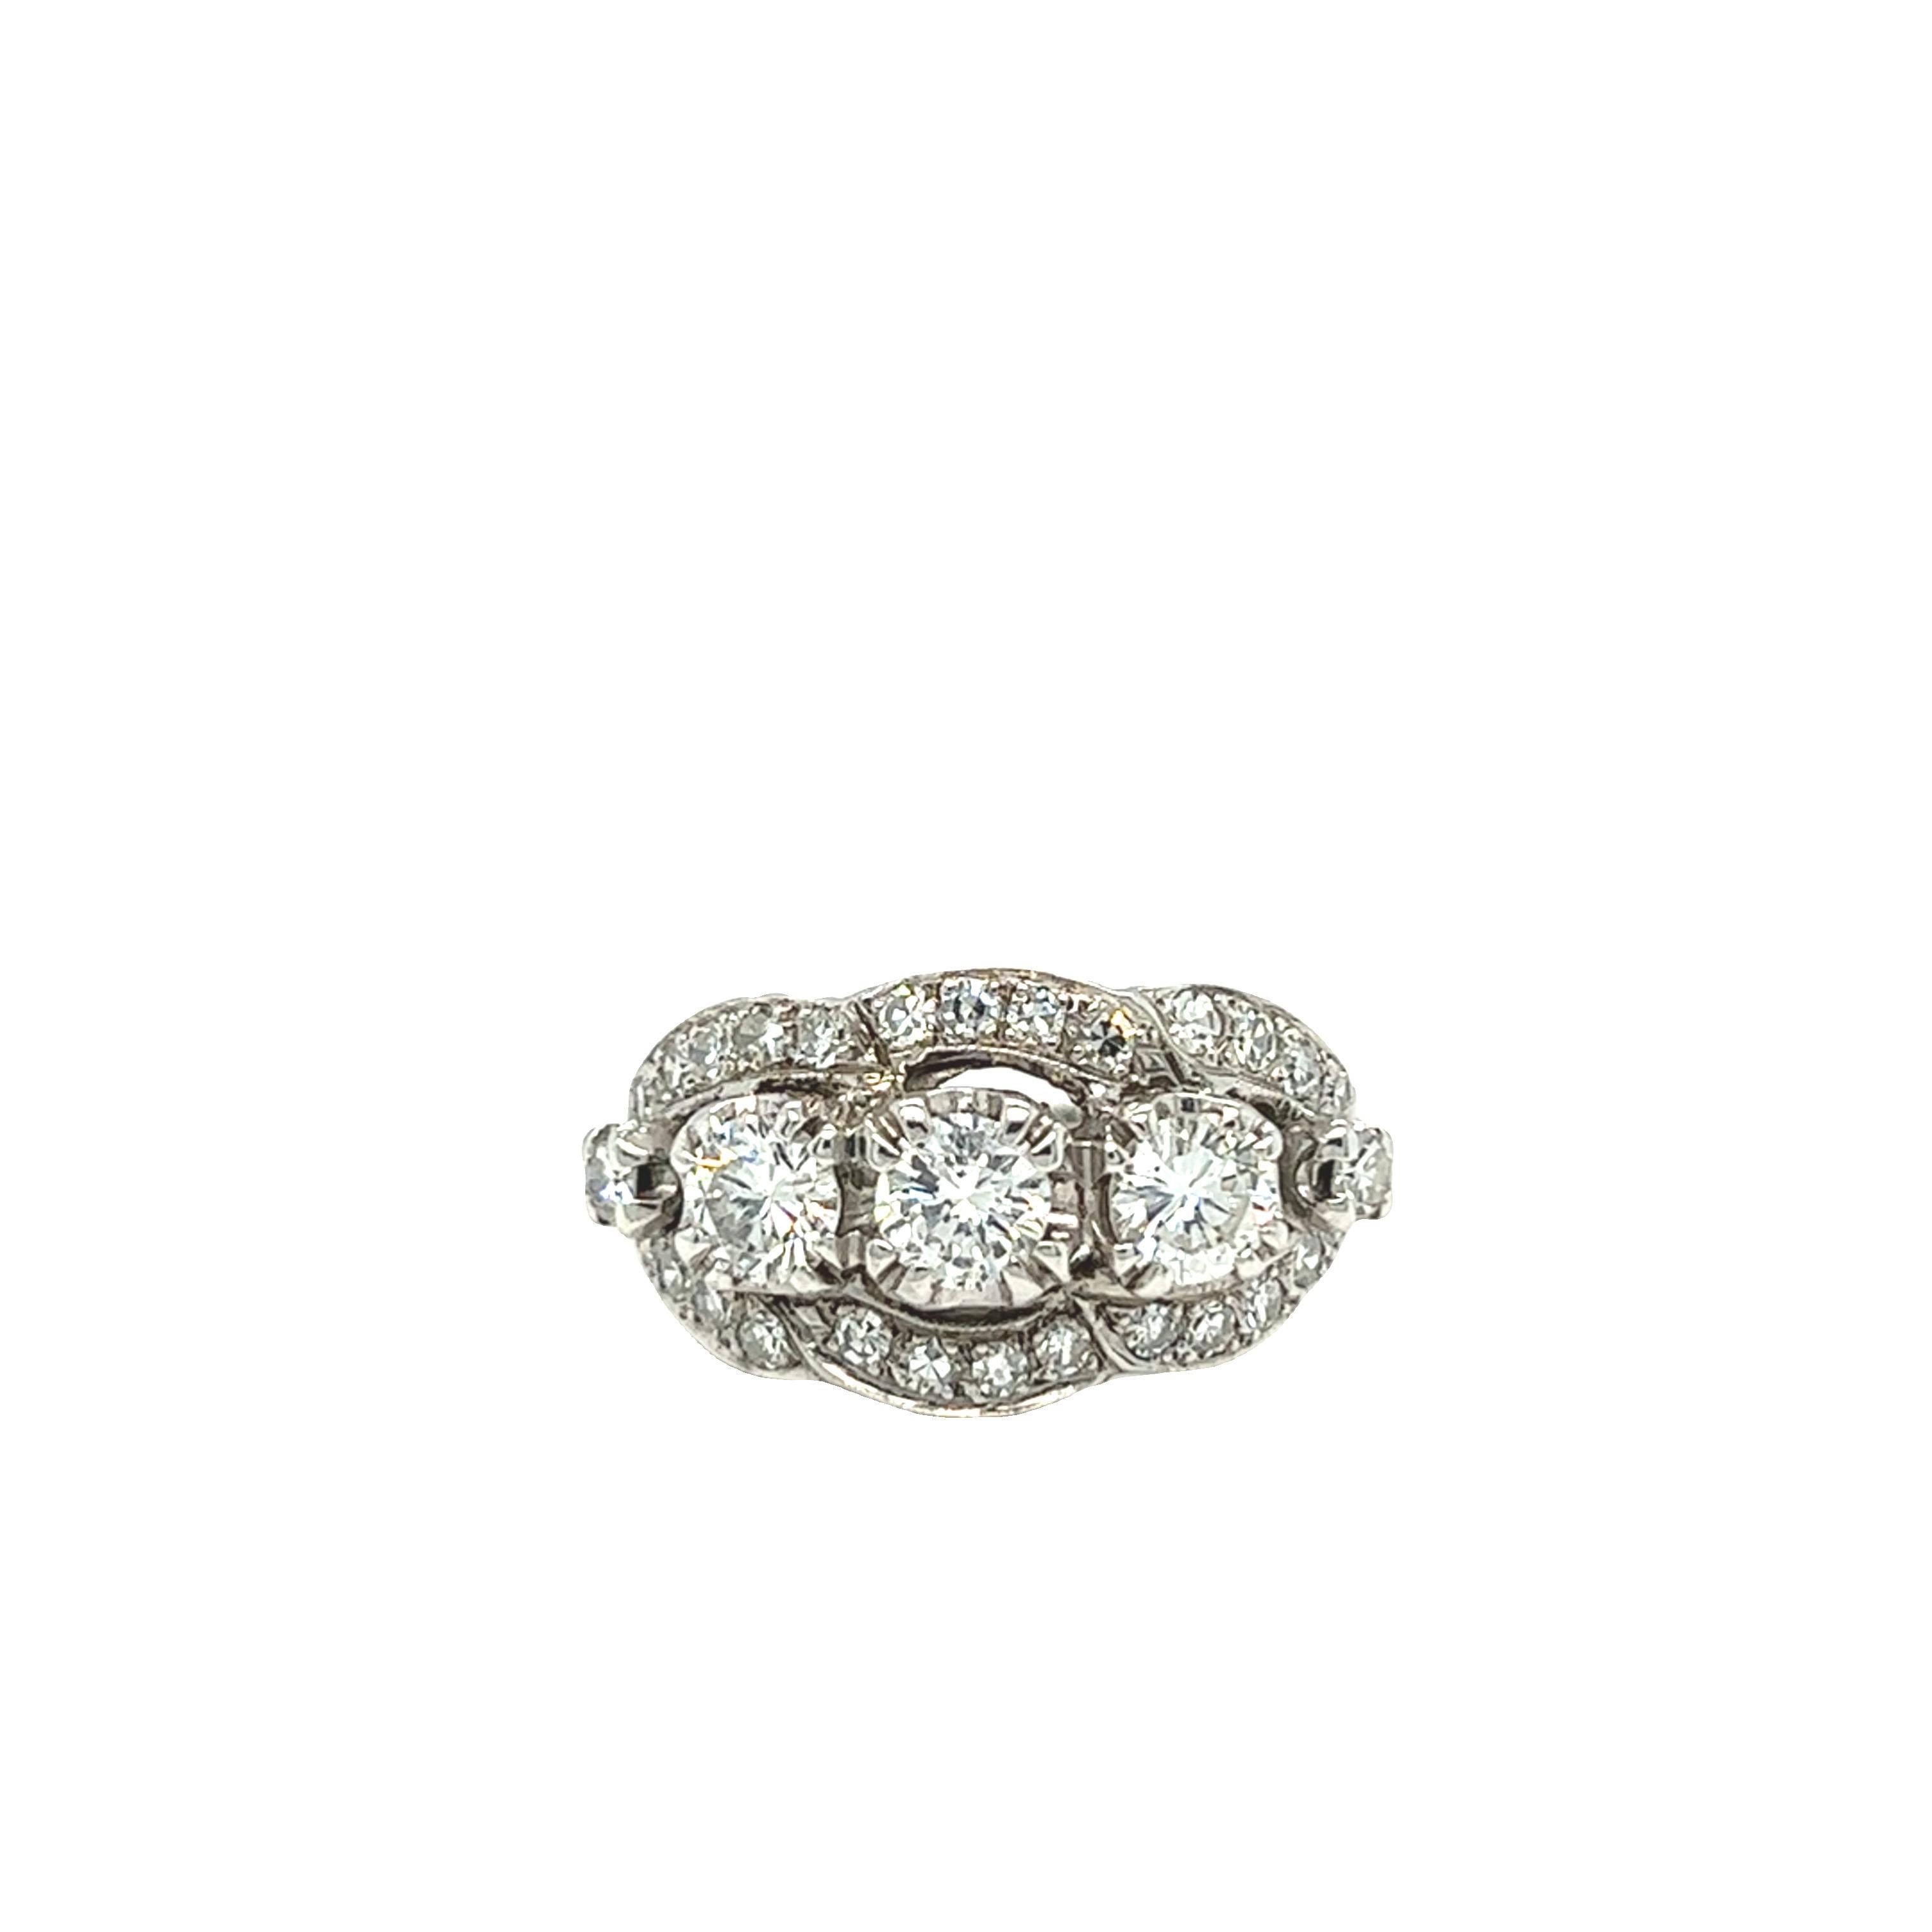 Vintage diamond ring showcases three diamonds at center weighing 0.40 carat, 0.30 carat, and 0.30 carat with quality H color and SI1 clarity. Near colorless single cut diamonds beautifully frame around the center three stones in ribbon like design